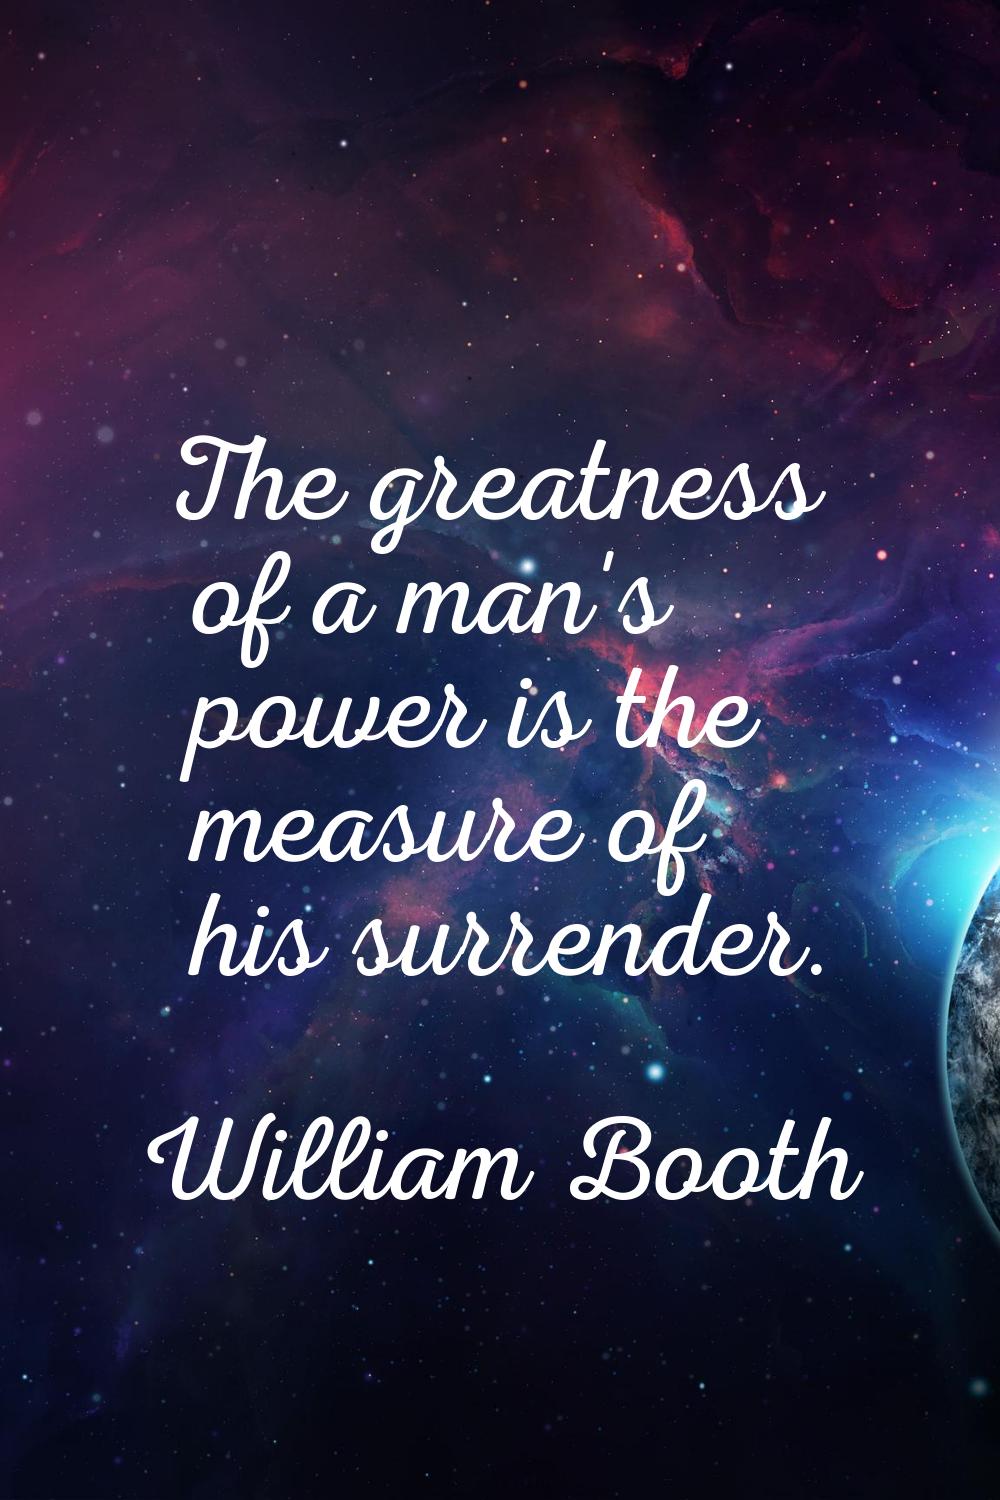 The greatness of a man's power is the measure of his surrender.